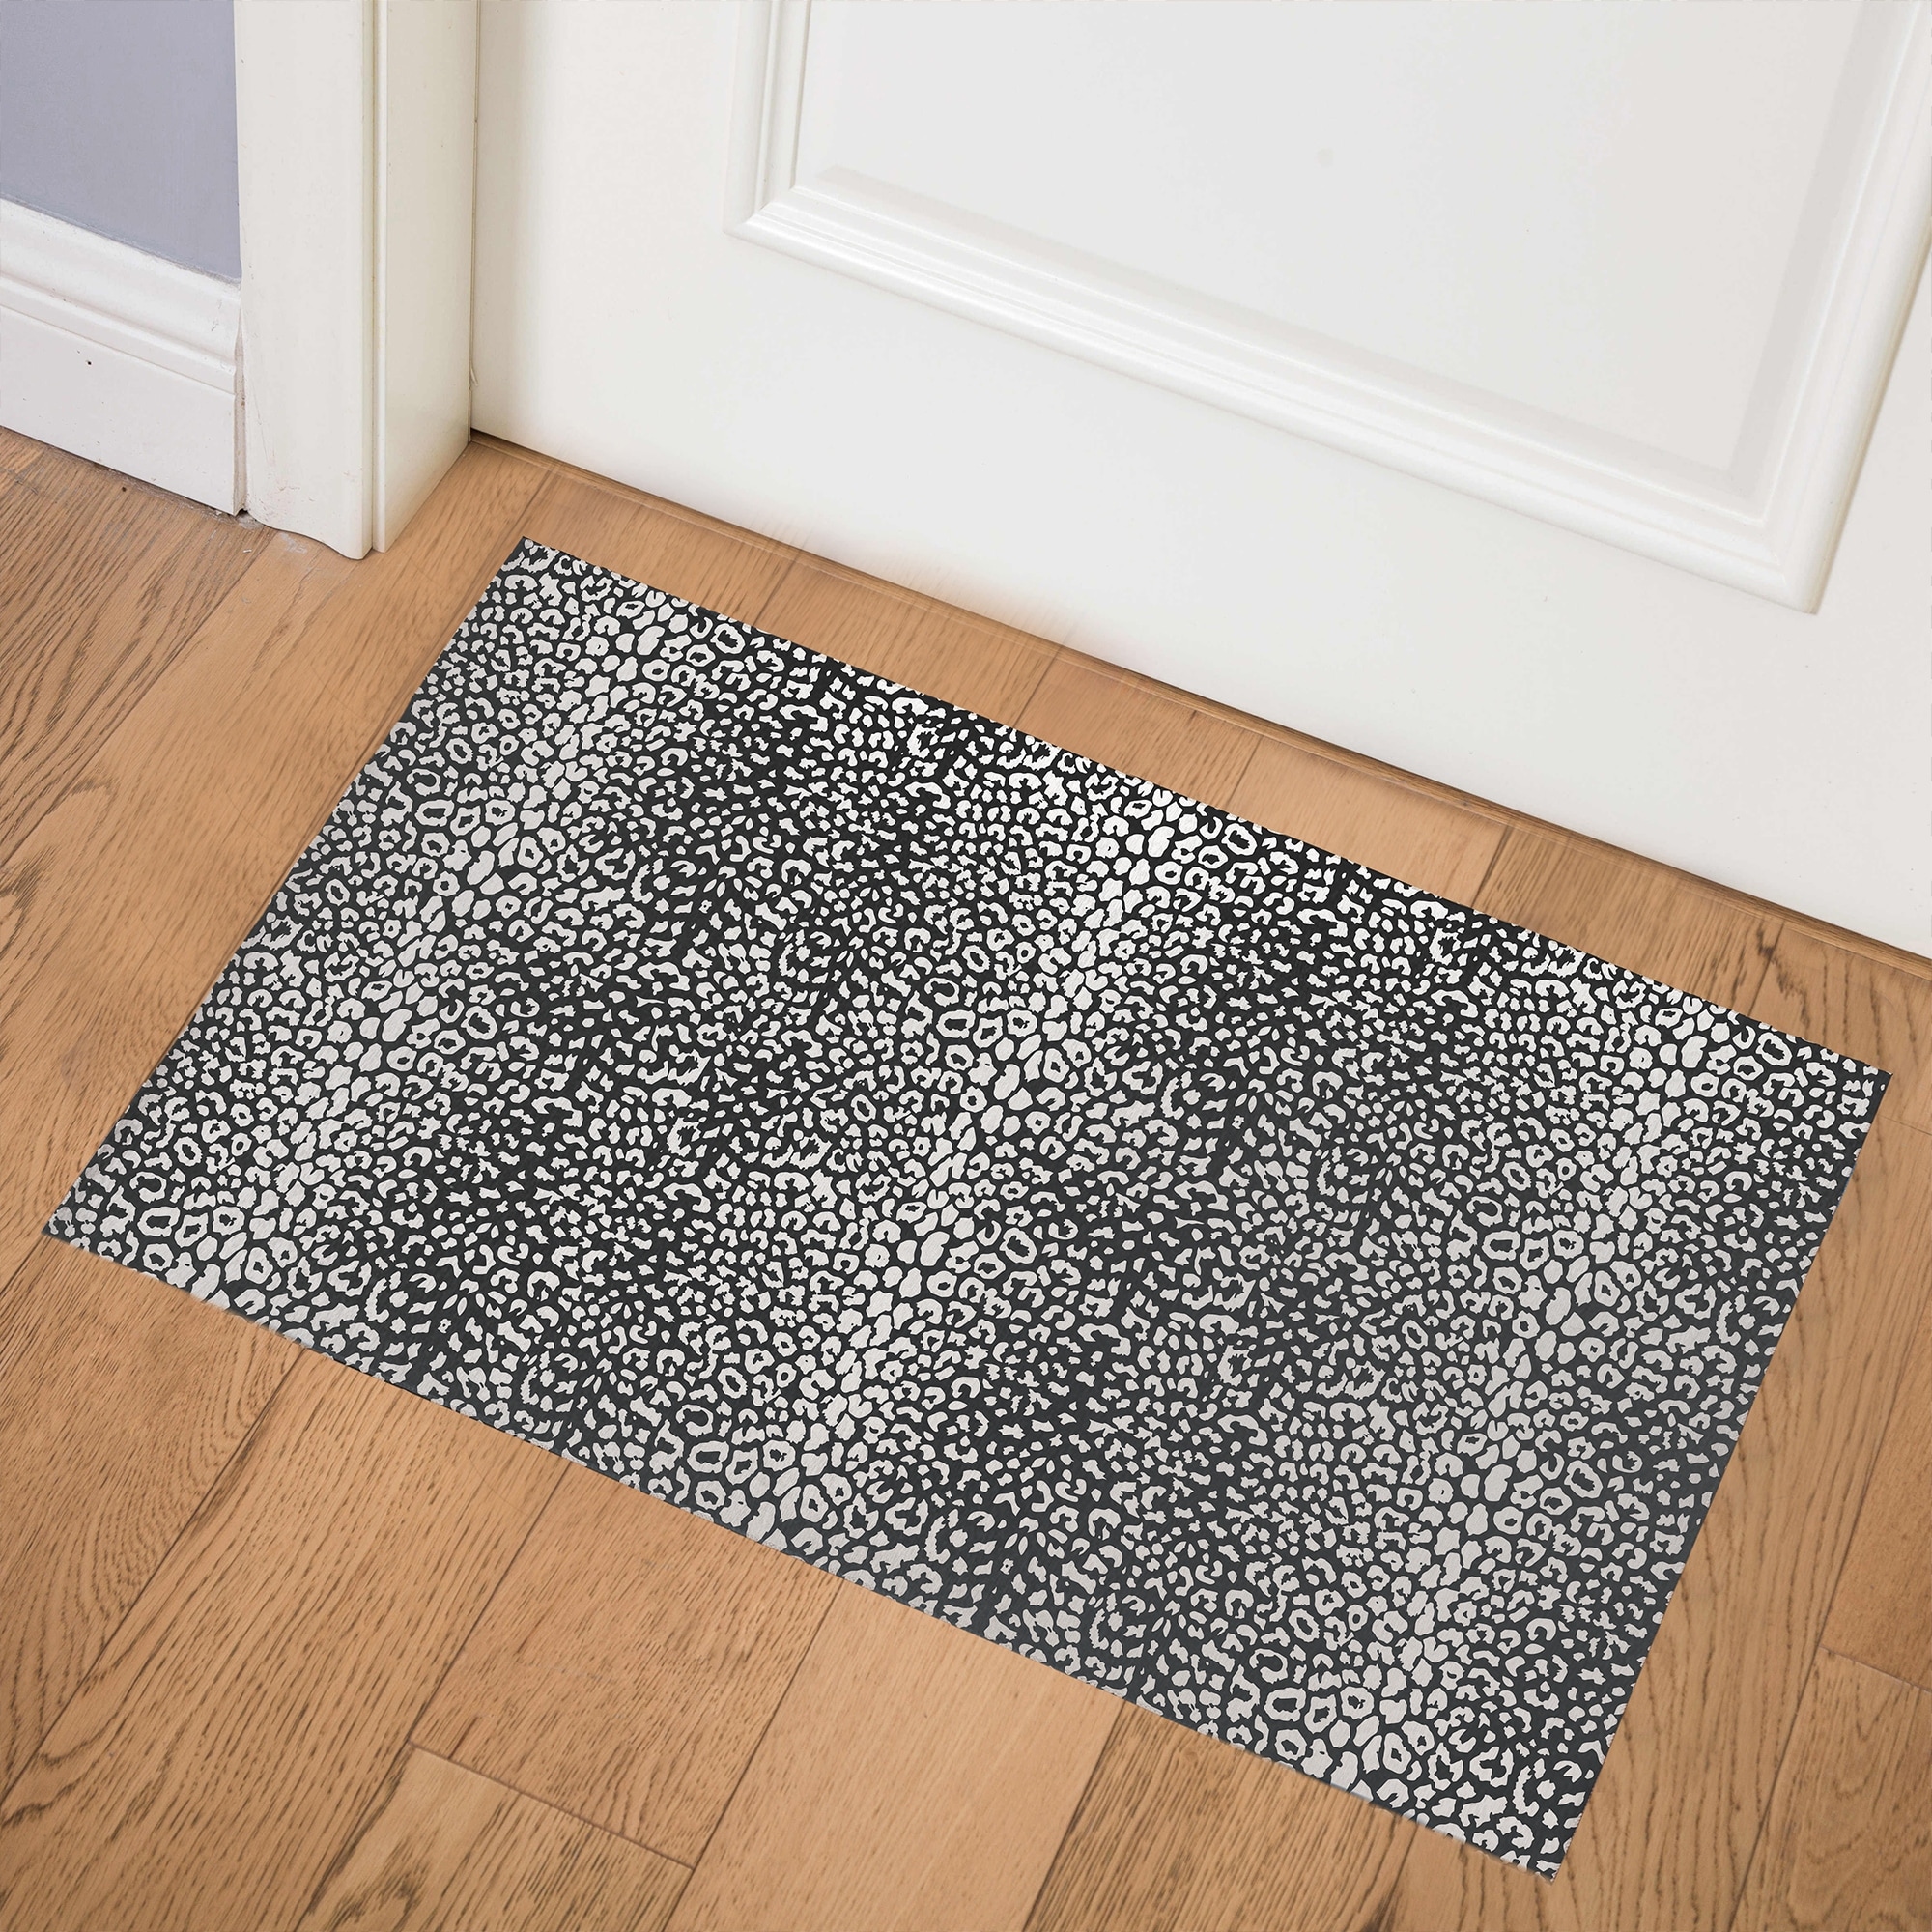 https://ak1.ostkcdn.com/images/products/is/images/direct/3ac9e620ce9e06dfa1e56270e47332b690848128/CHEETAH-BLACK-AND-WHITE-Indoor-Door-Mat-By-Kavka-Designs.jpg